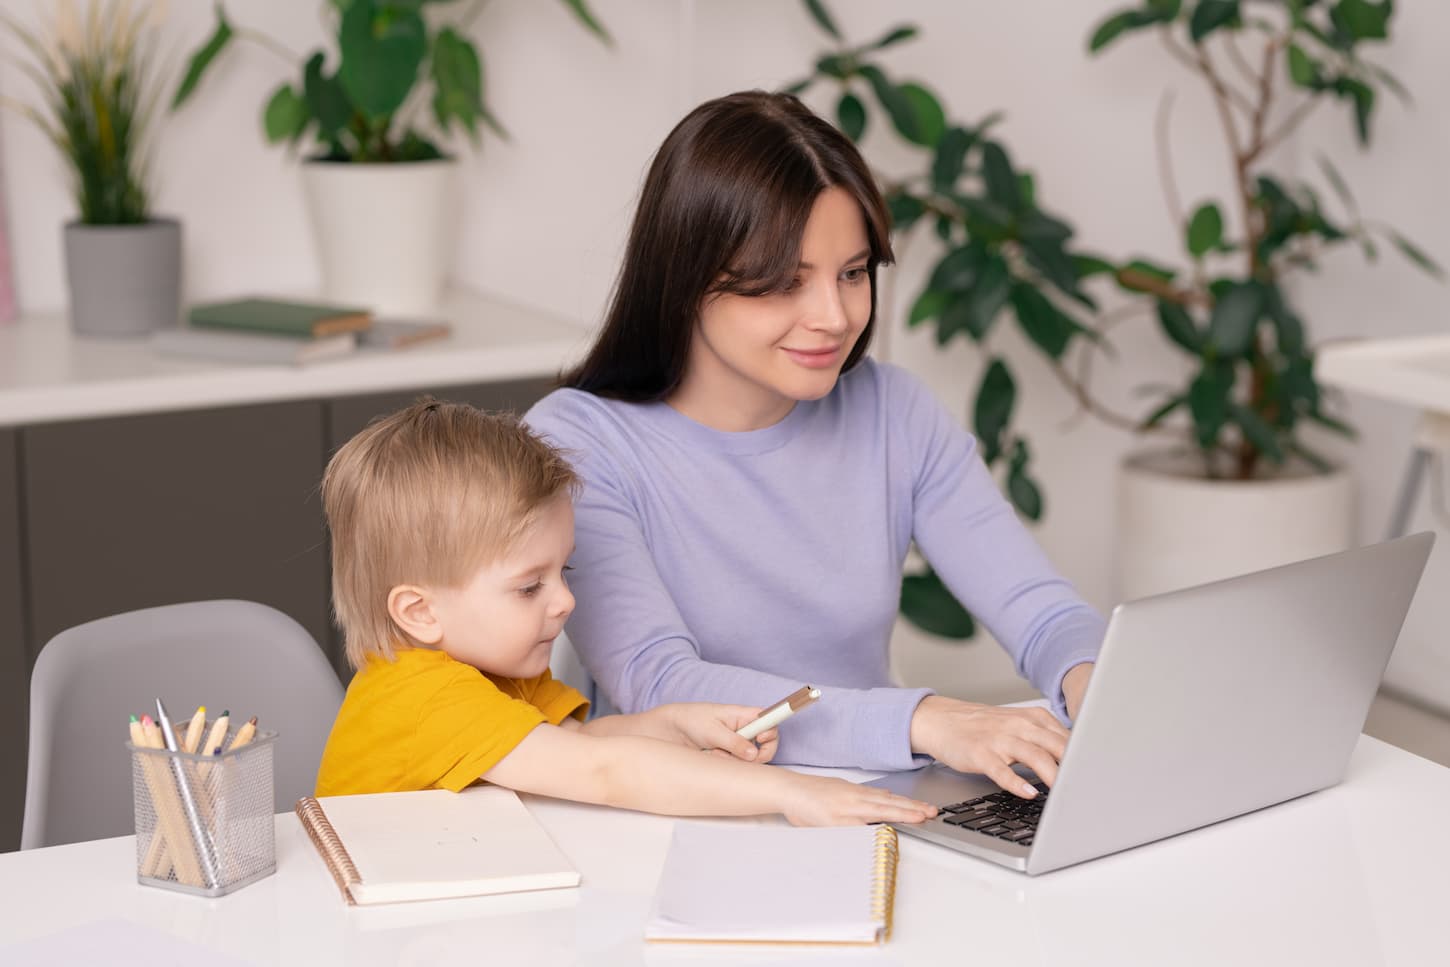 An image of a Cute son sitting at the table and touching a mother's laptop while assisting her with work, a young mom working at home.